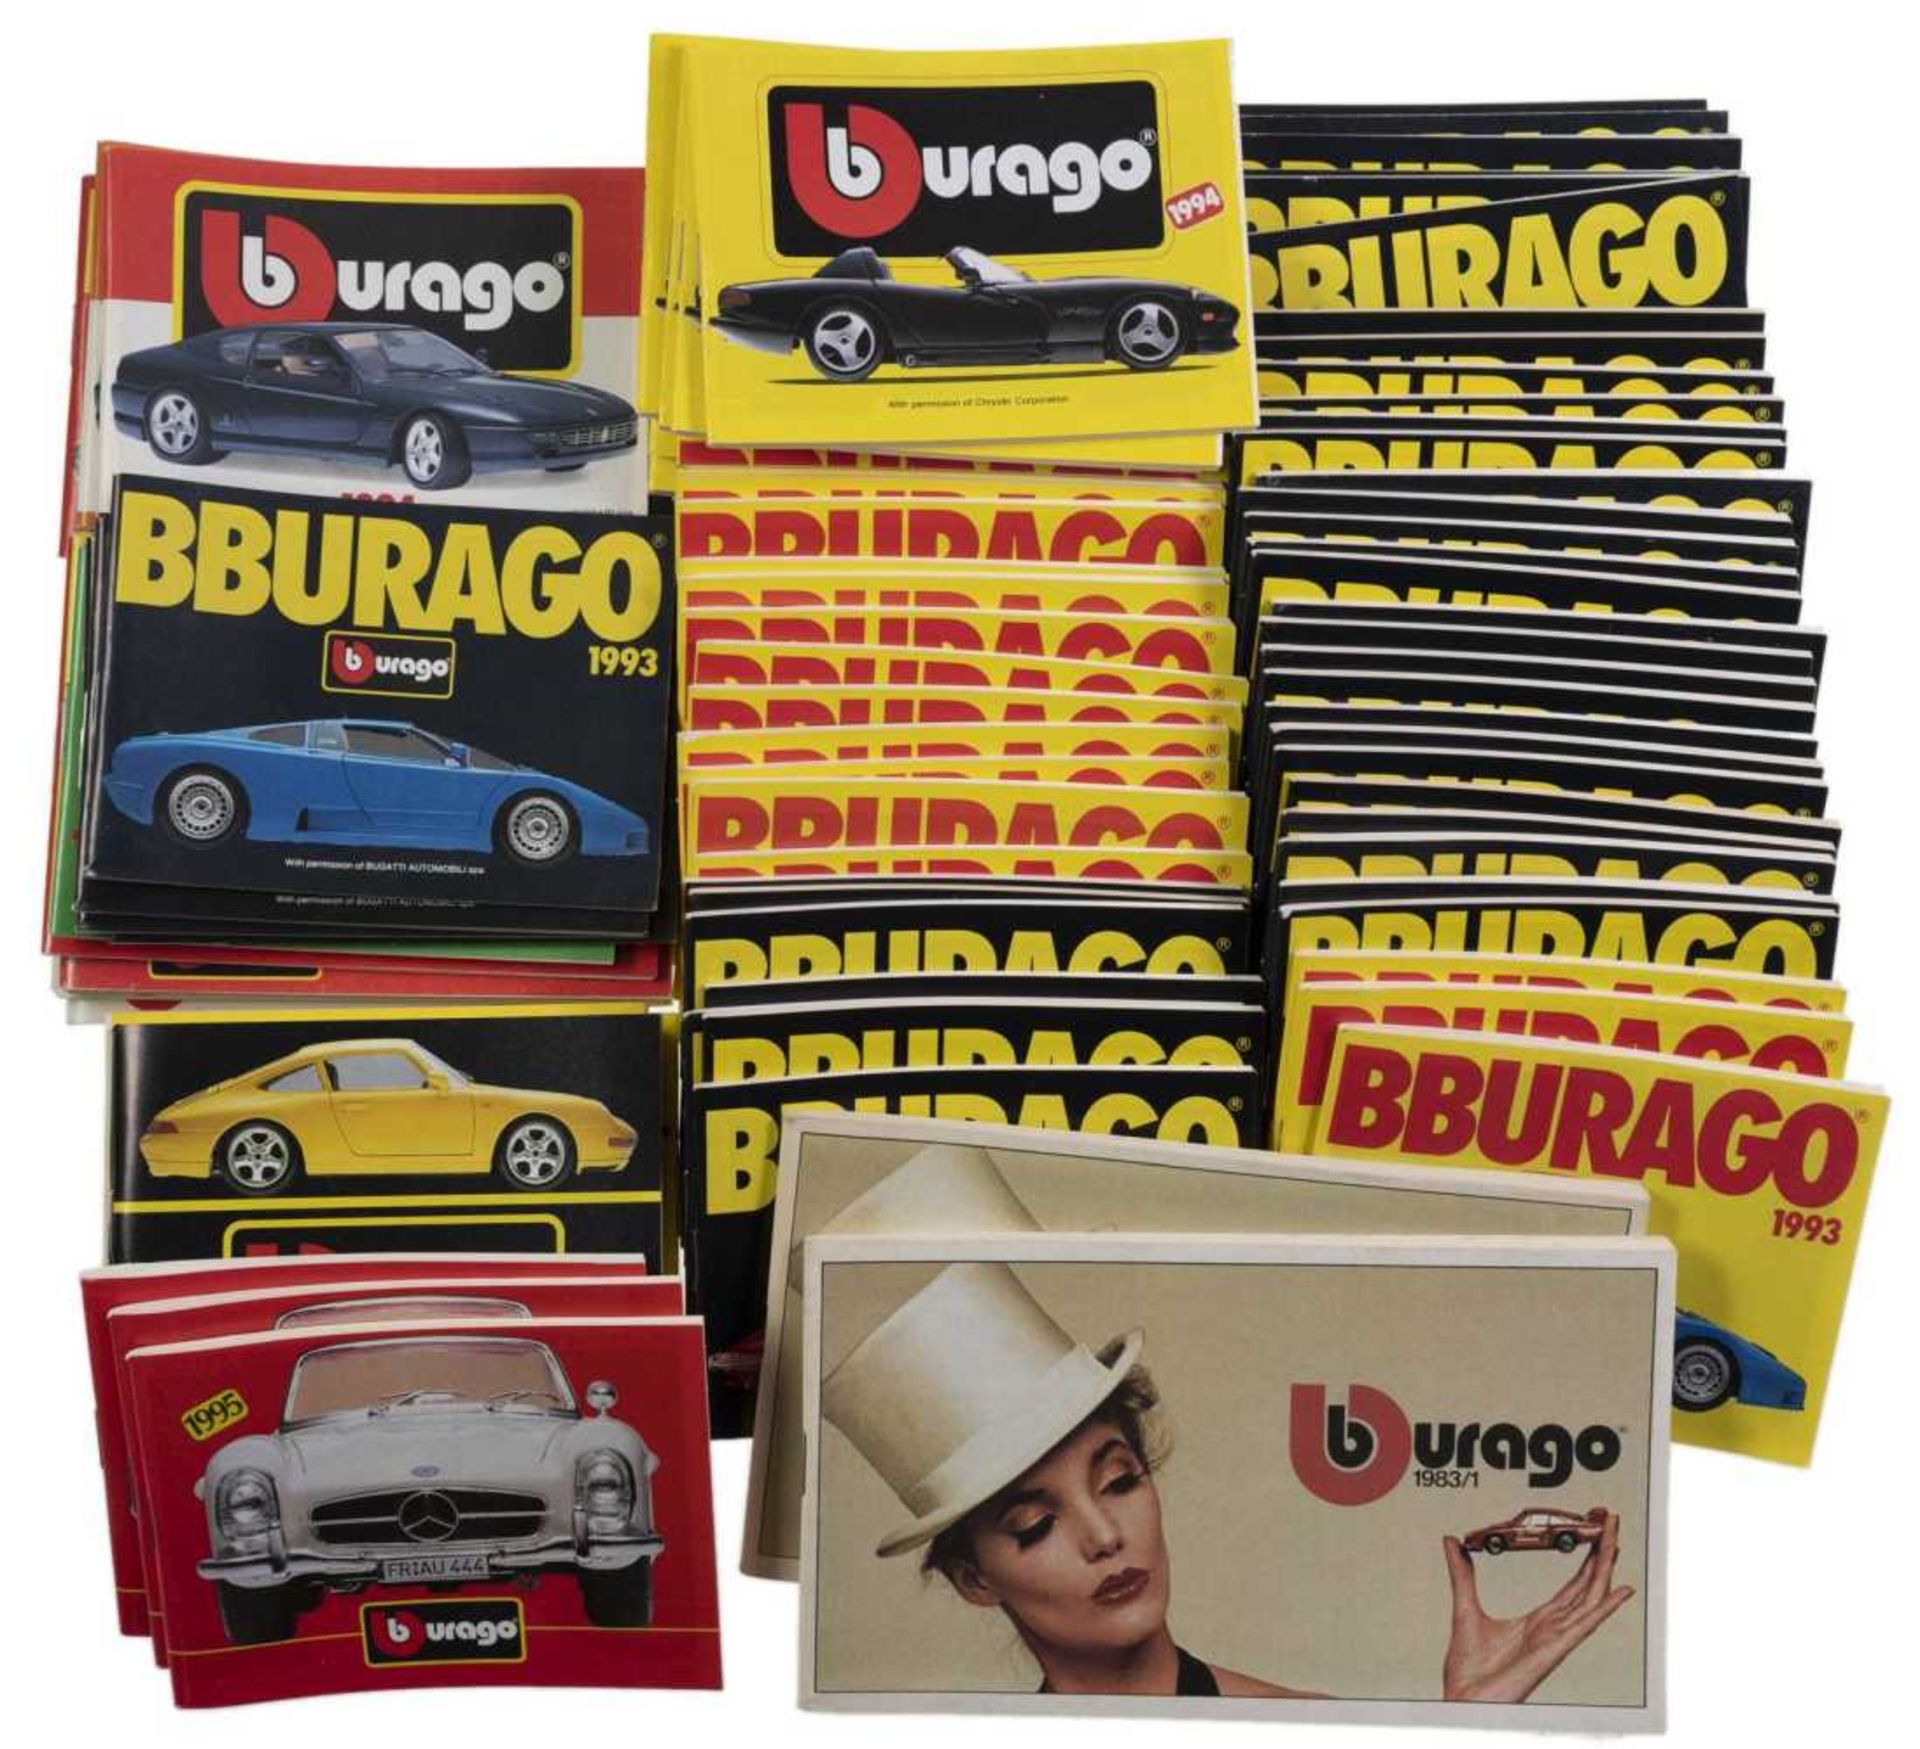 1983-1995, over 100 bags catalogues with 1983 (2), 1984 (3 in 2 variety), 1985, 1986 (2), 1989 (4),